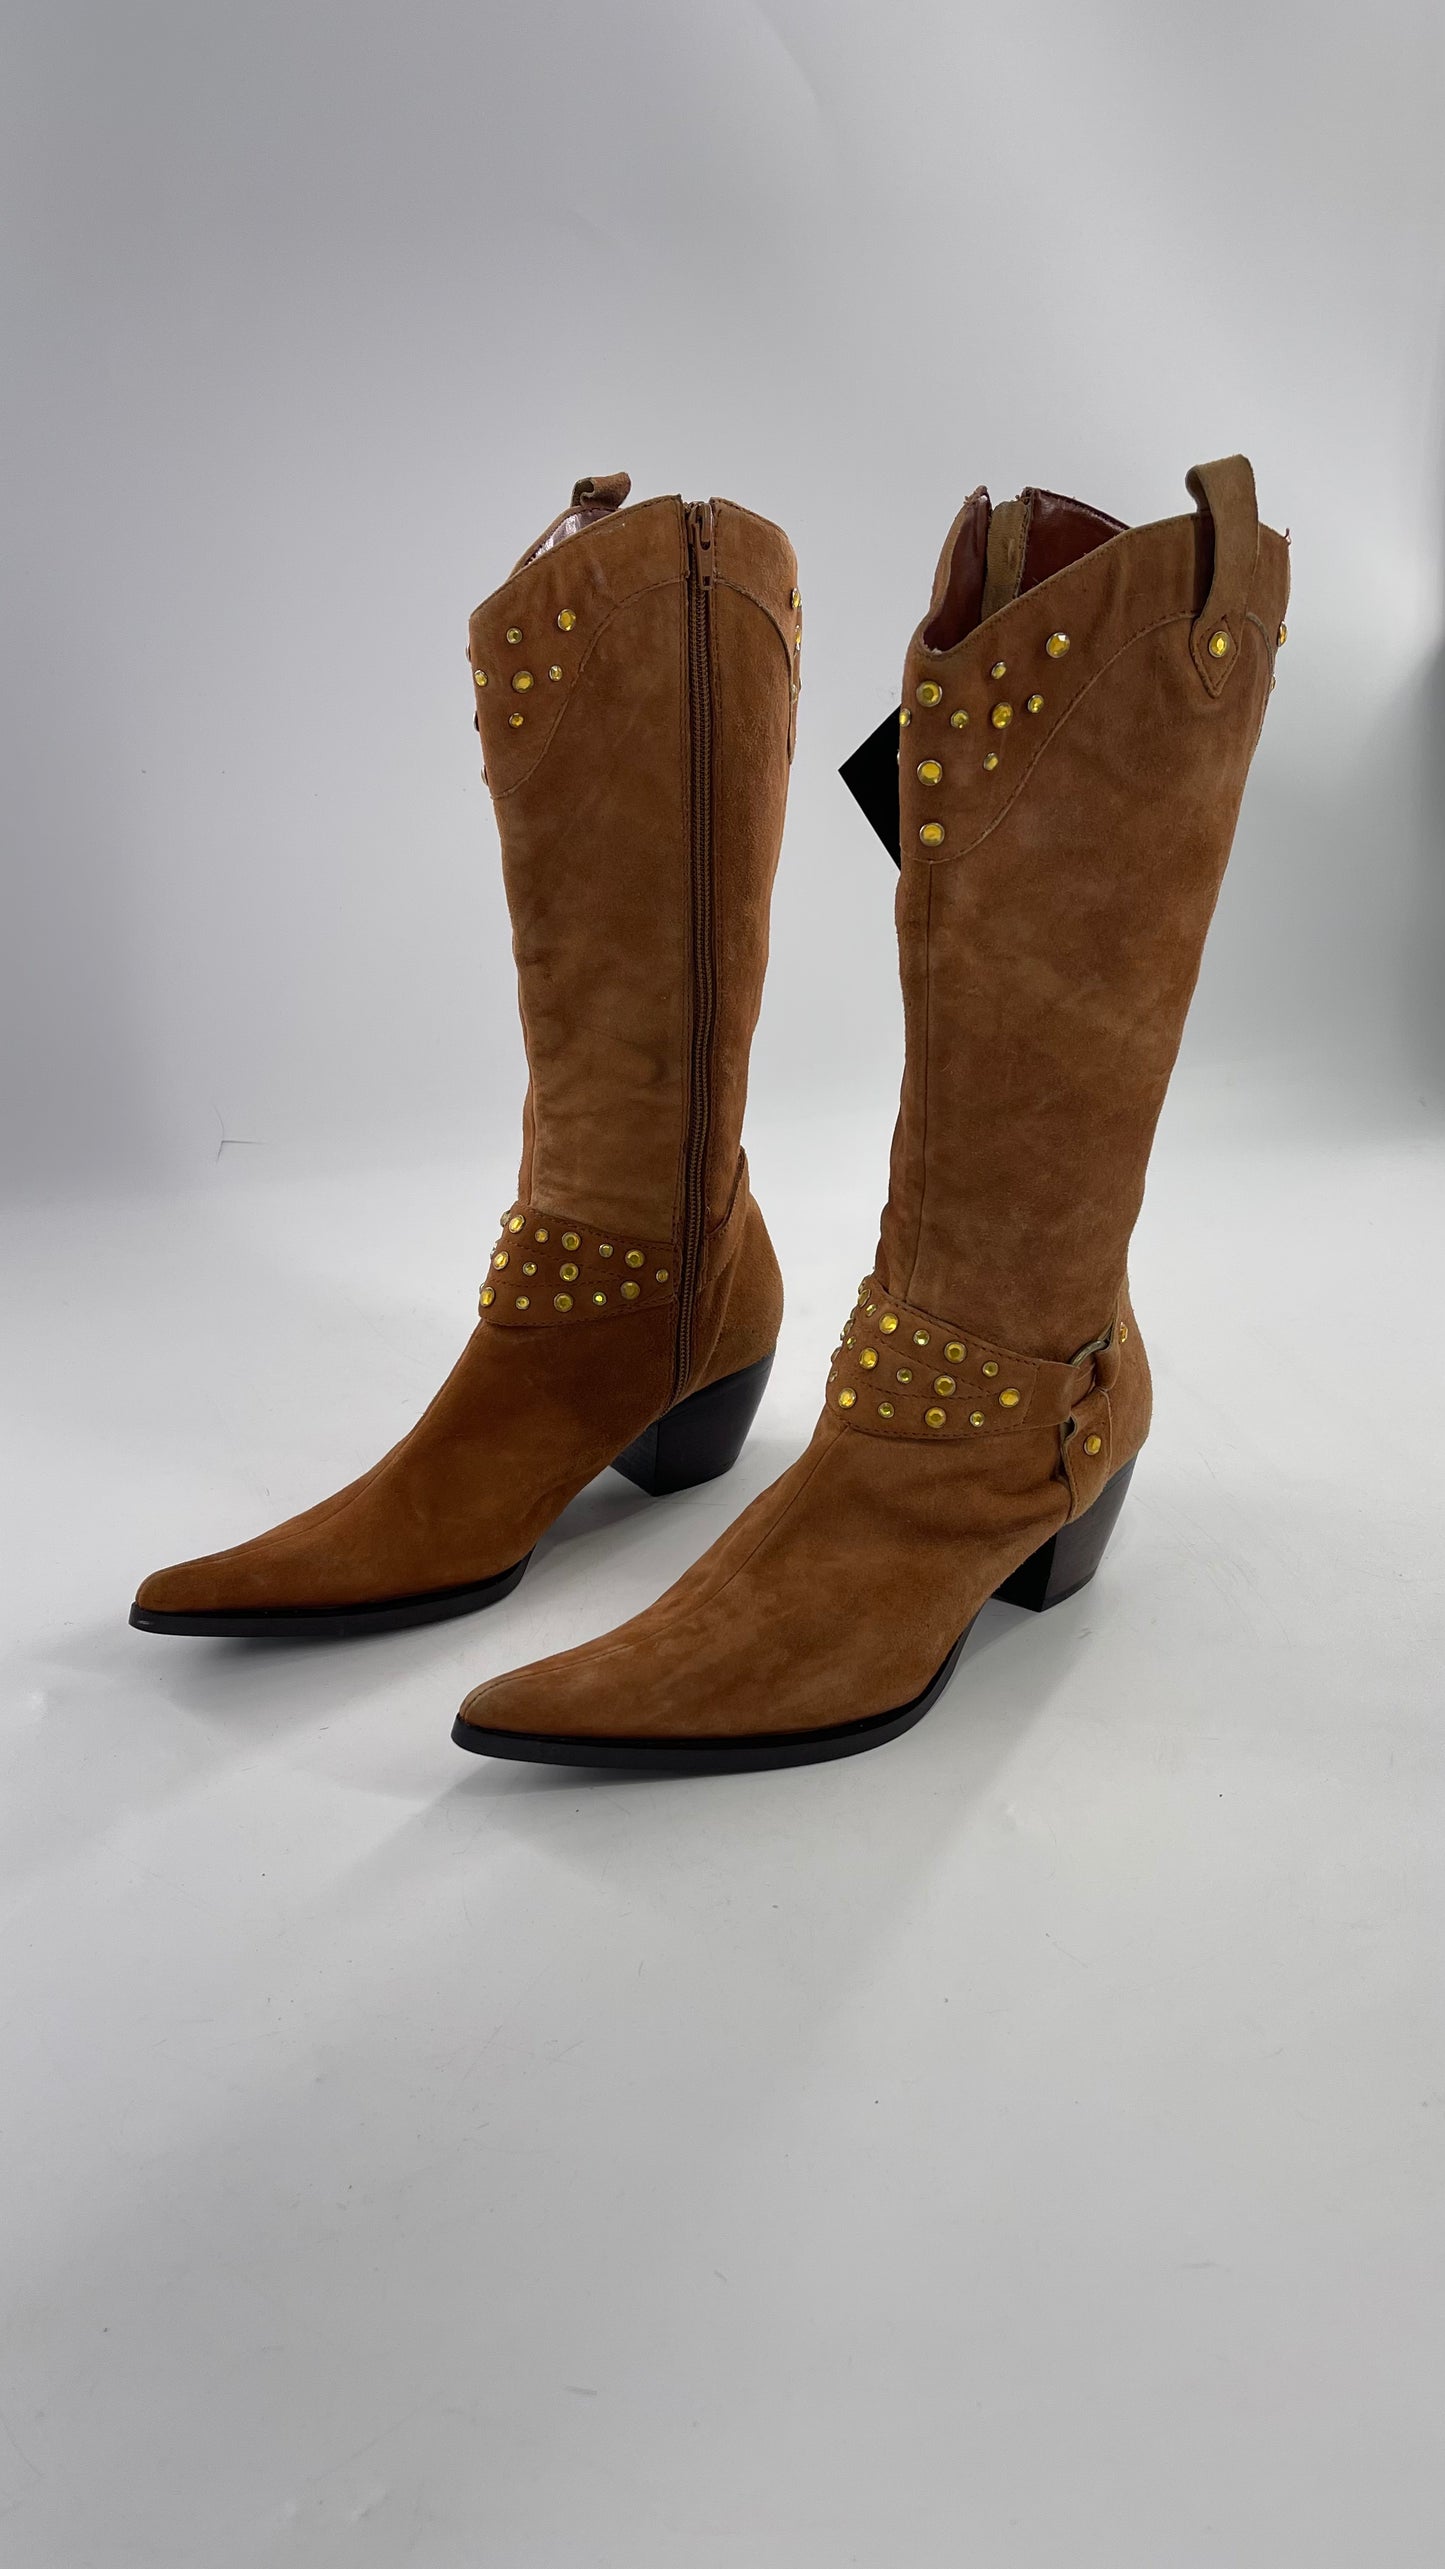 Vintage STEVEN Tan Suede Pointed Cowboy Boots with Yellow Crystal Embellishments (9.5)